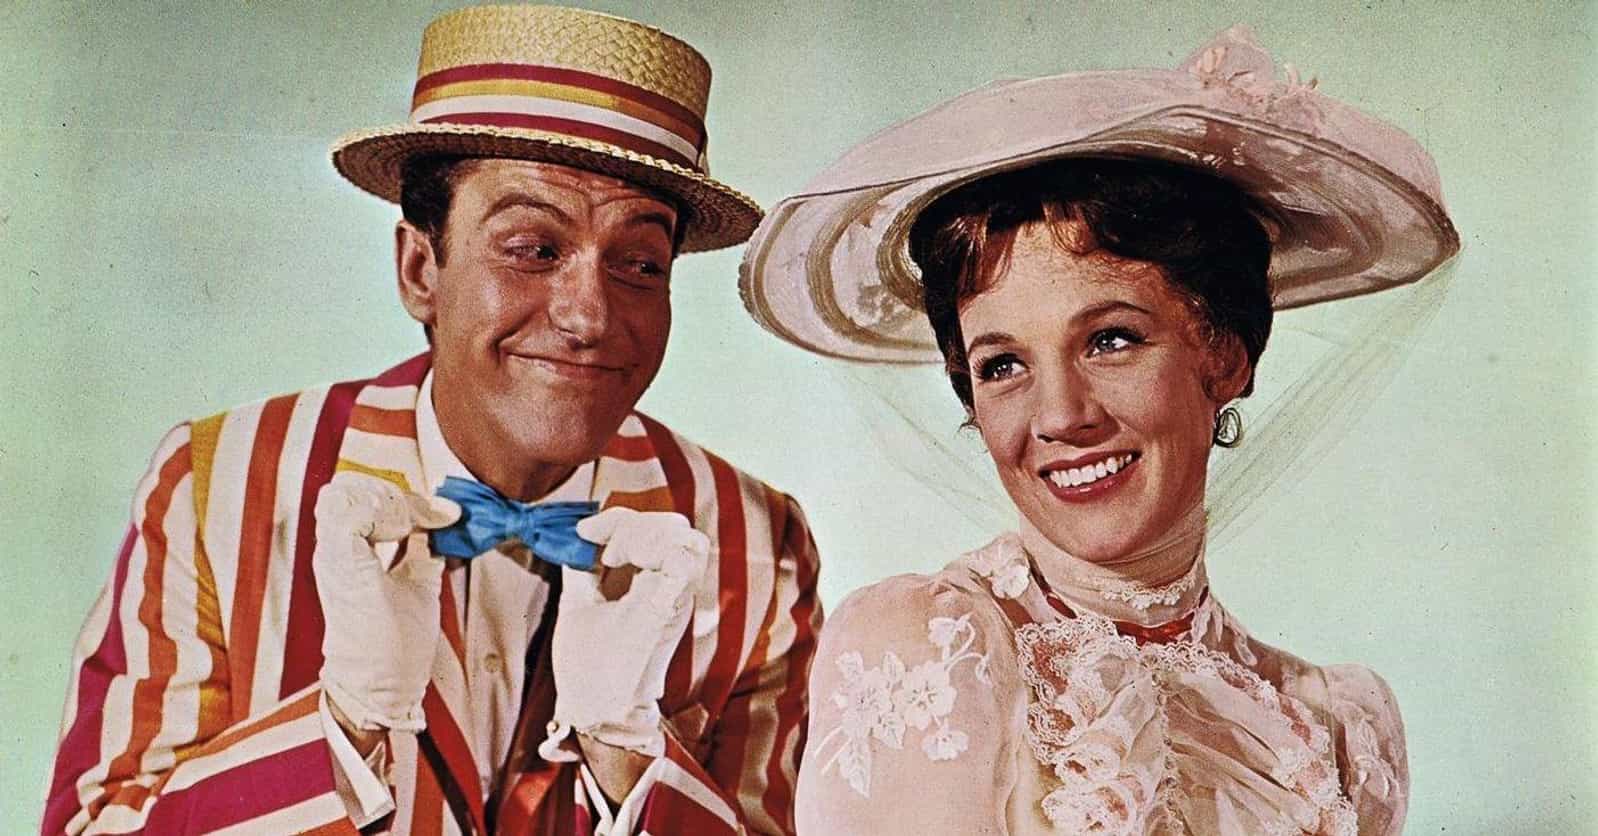 Behind The Scenes, The Making Of 'Mary Poppins' Was Not As Magical As You'd Think